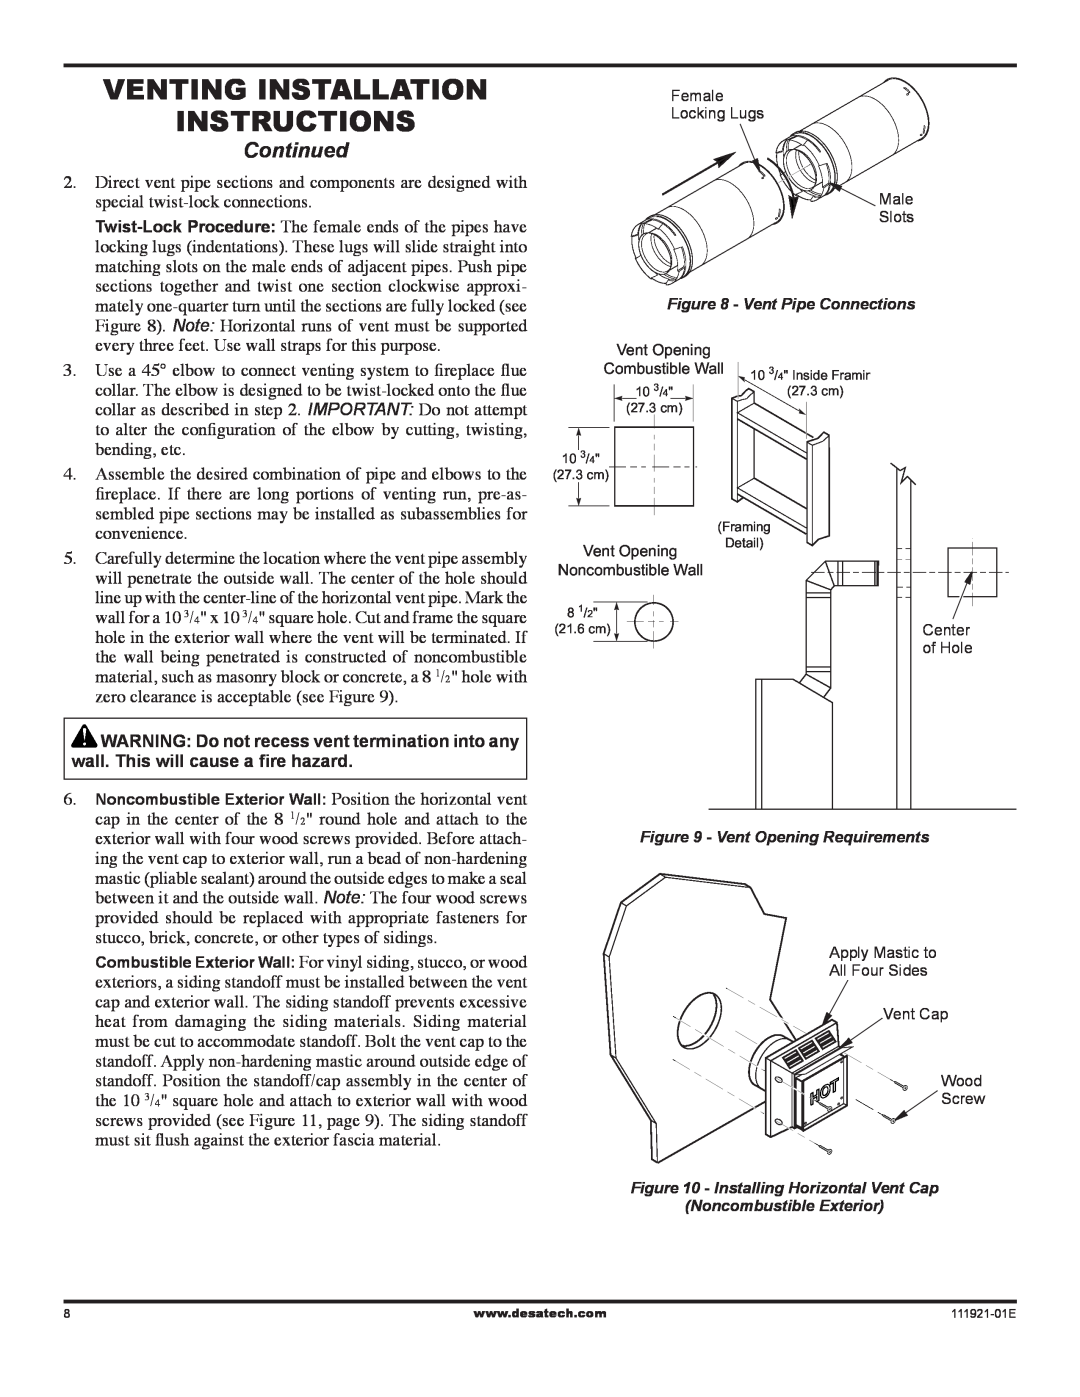 Desa (V)K42P Venting Installation instructions, Continued, Vent Pipe Connections, Vent Opening Requirements 